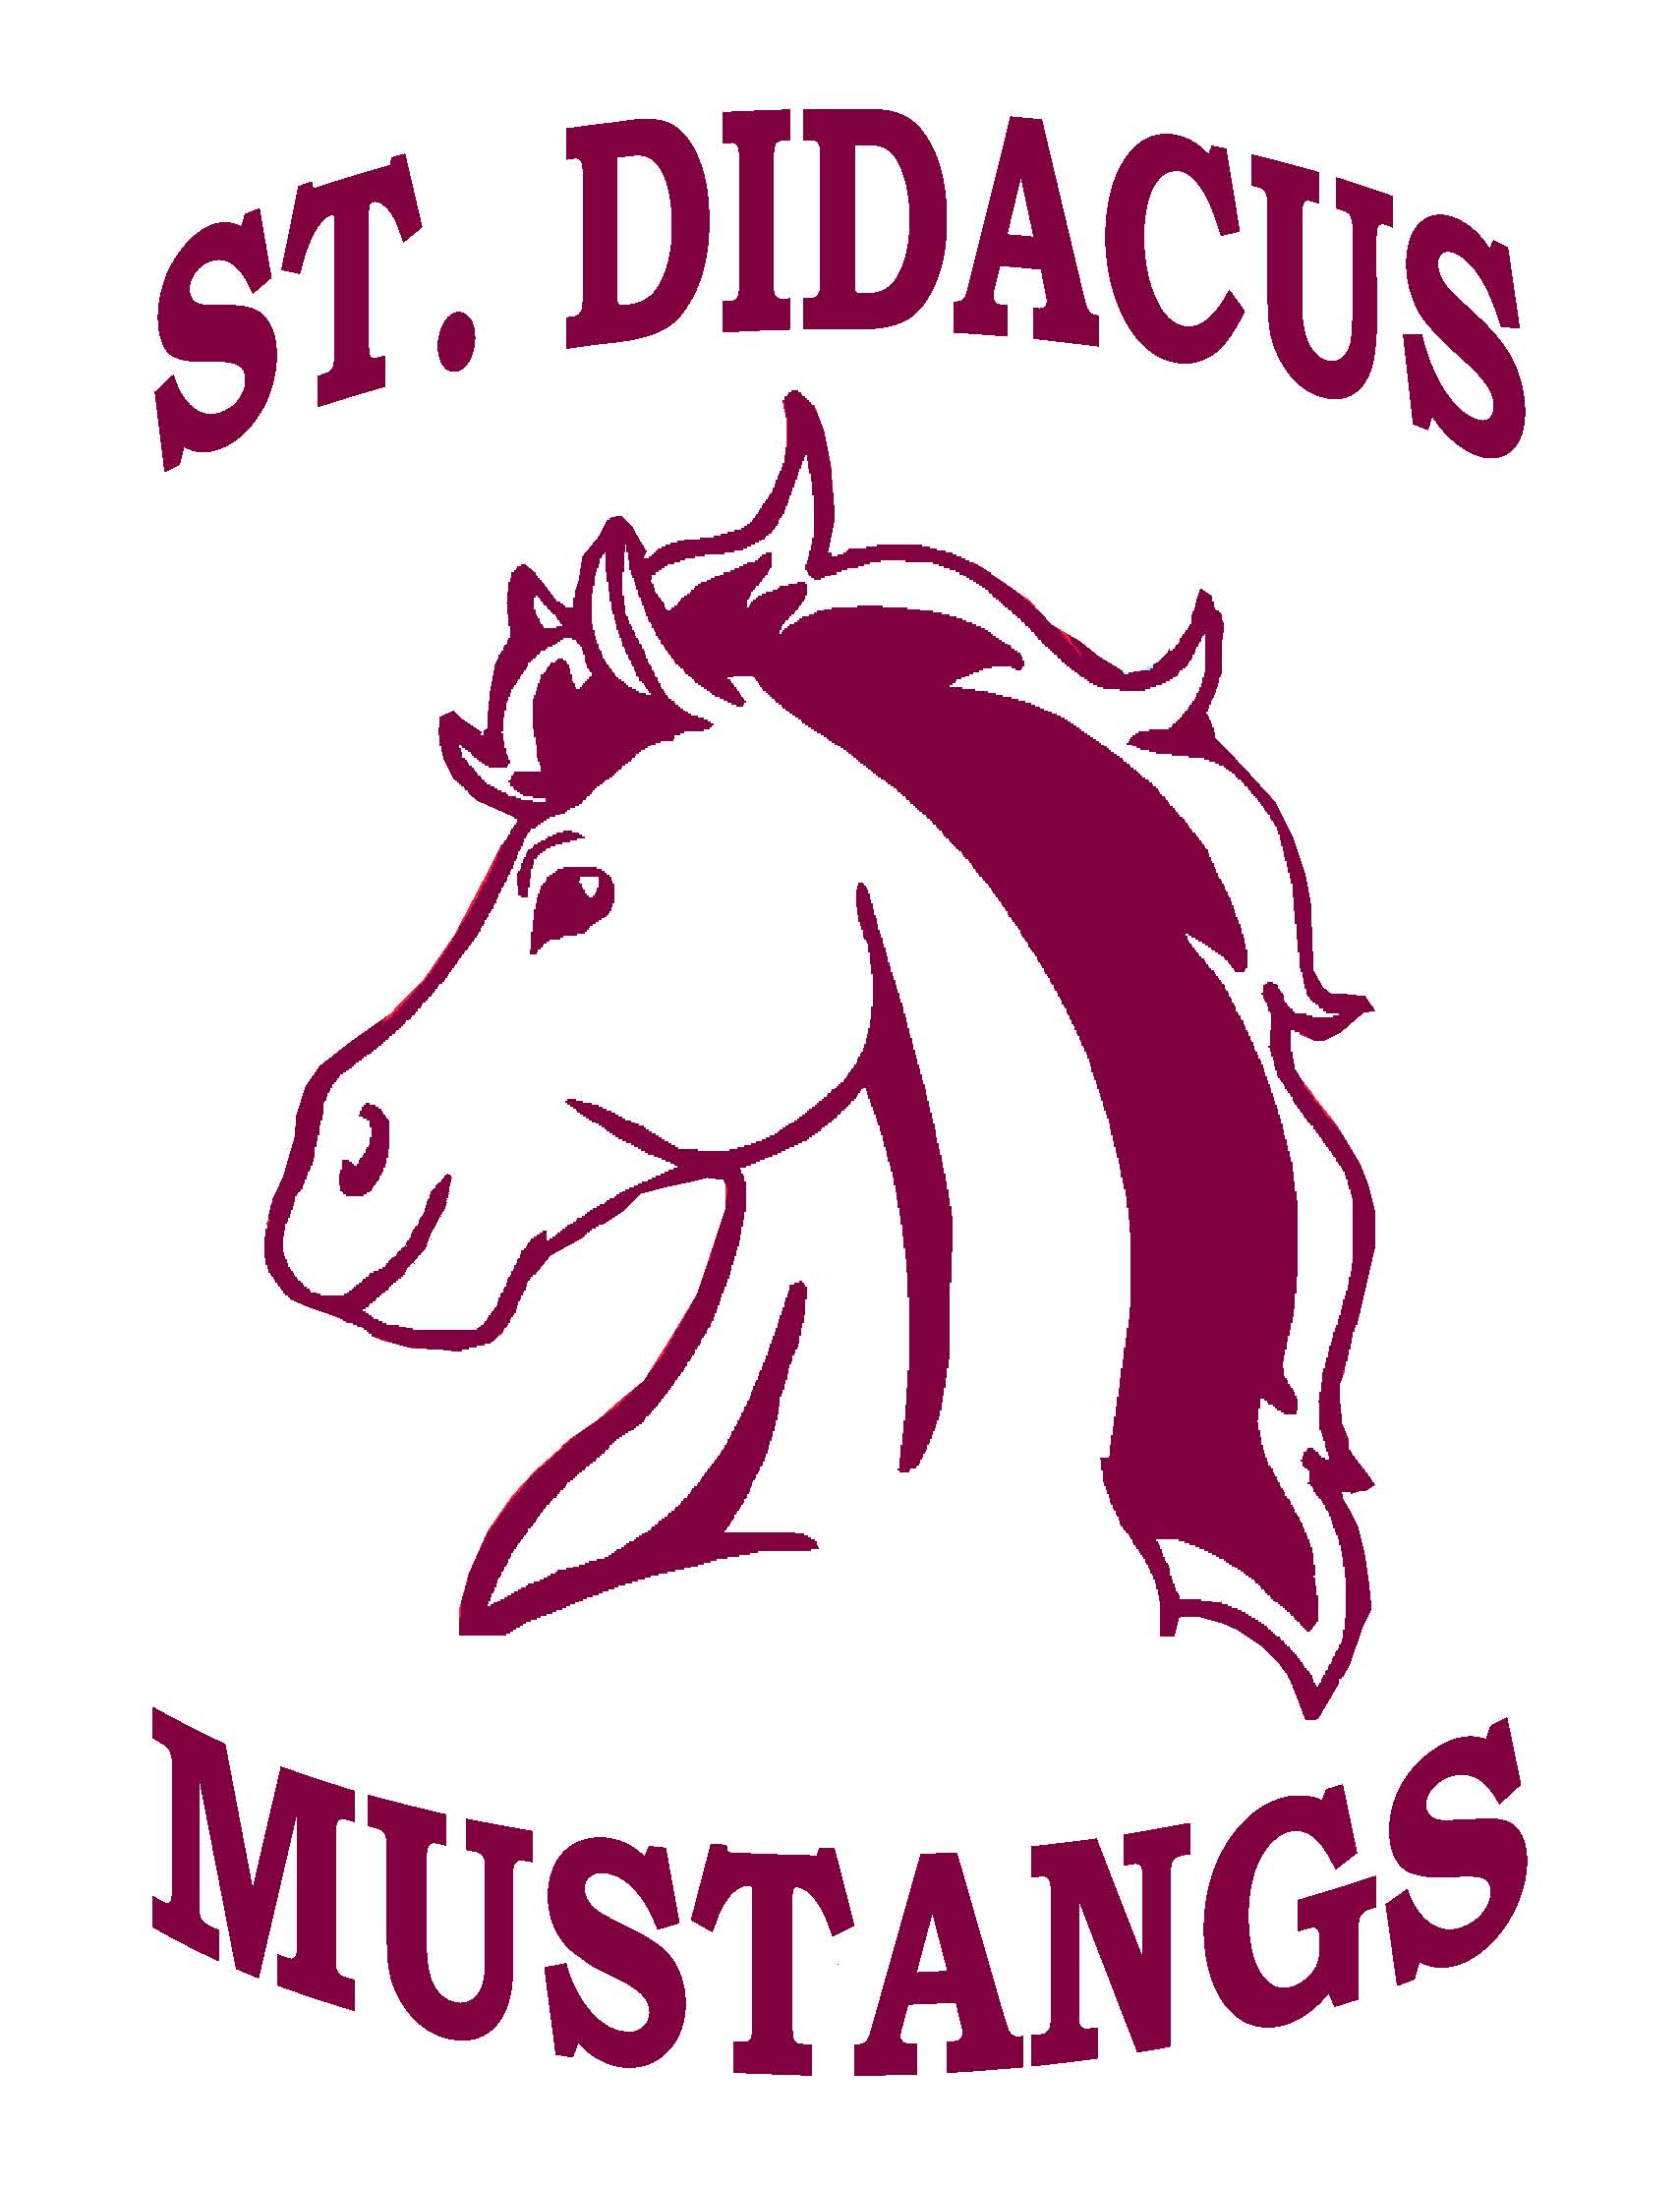 The St. Didacus Mustangs